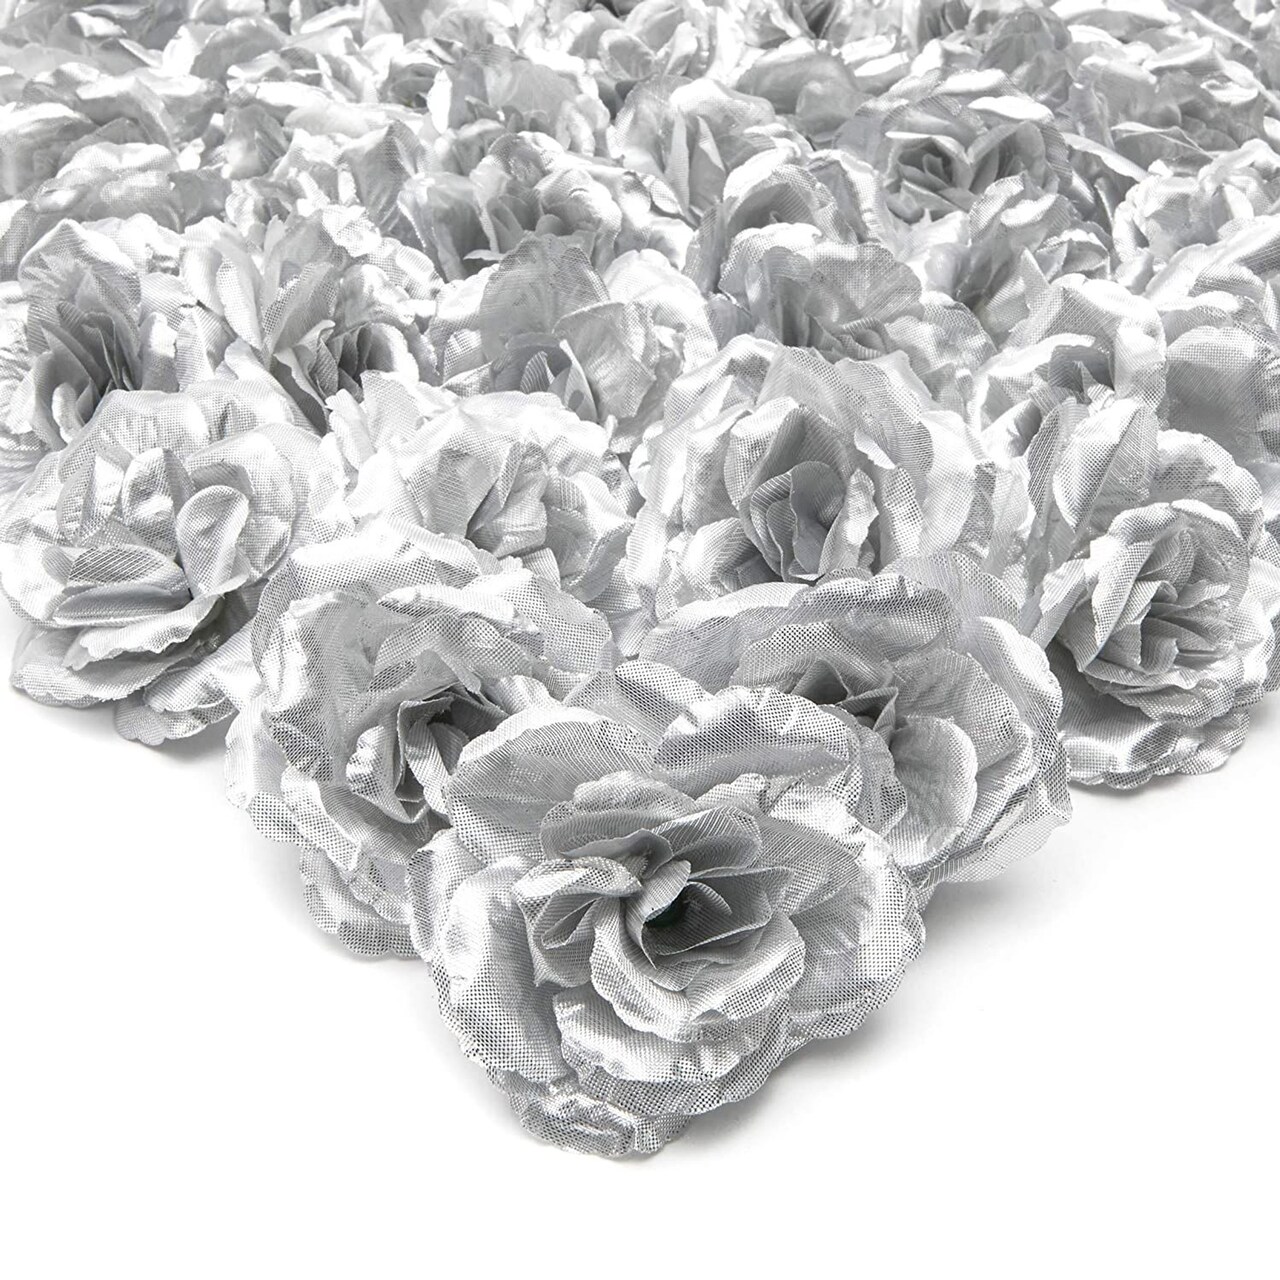 100 Pack Silver Rose Flower Heads for DIY Crafts, Artificial